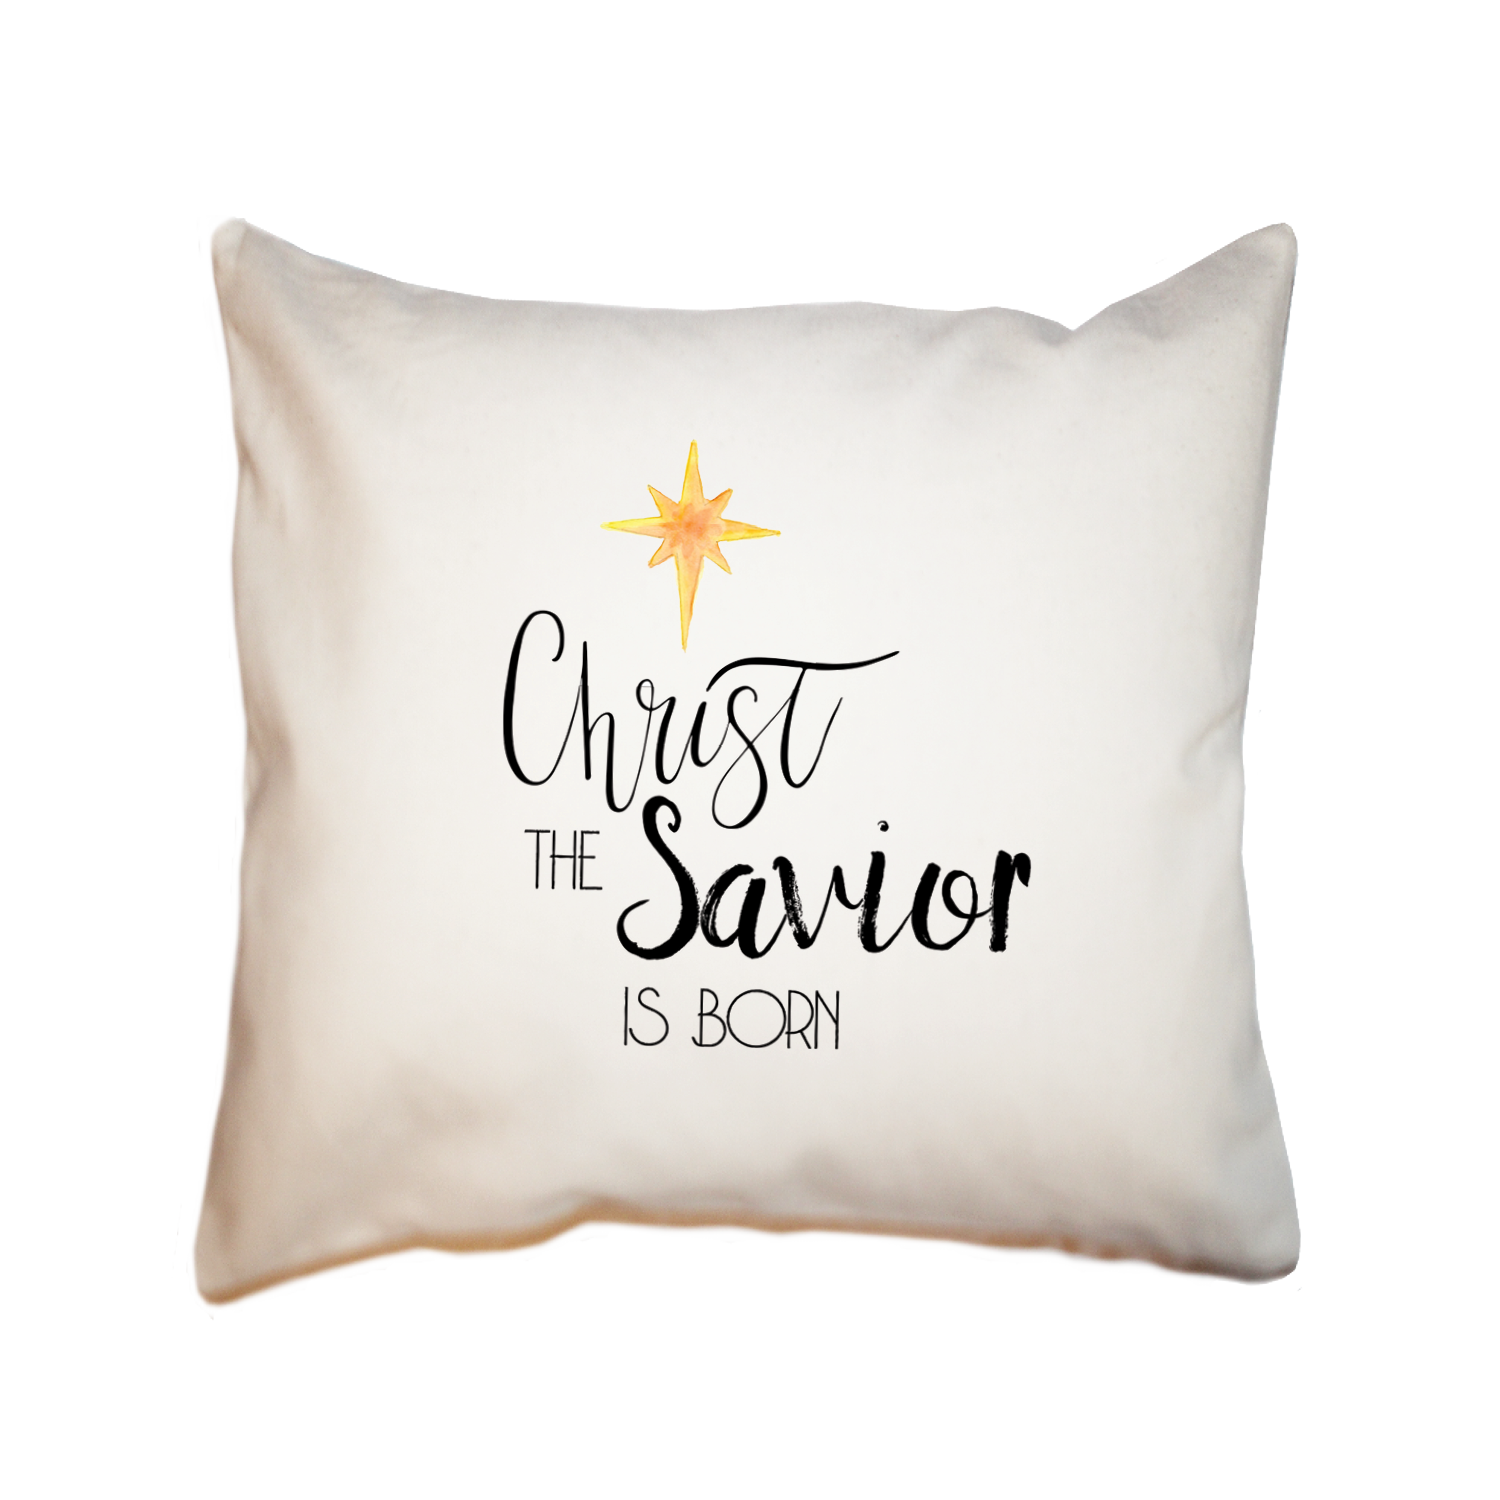 Christ is born square pillow